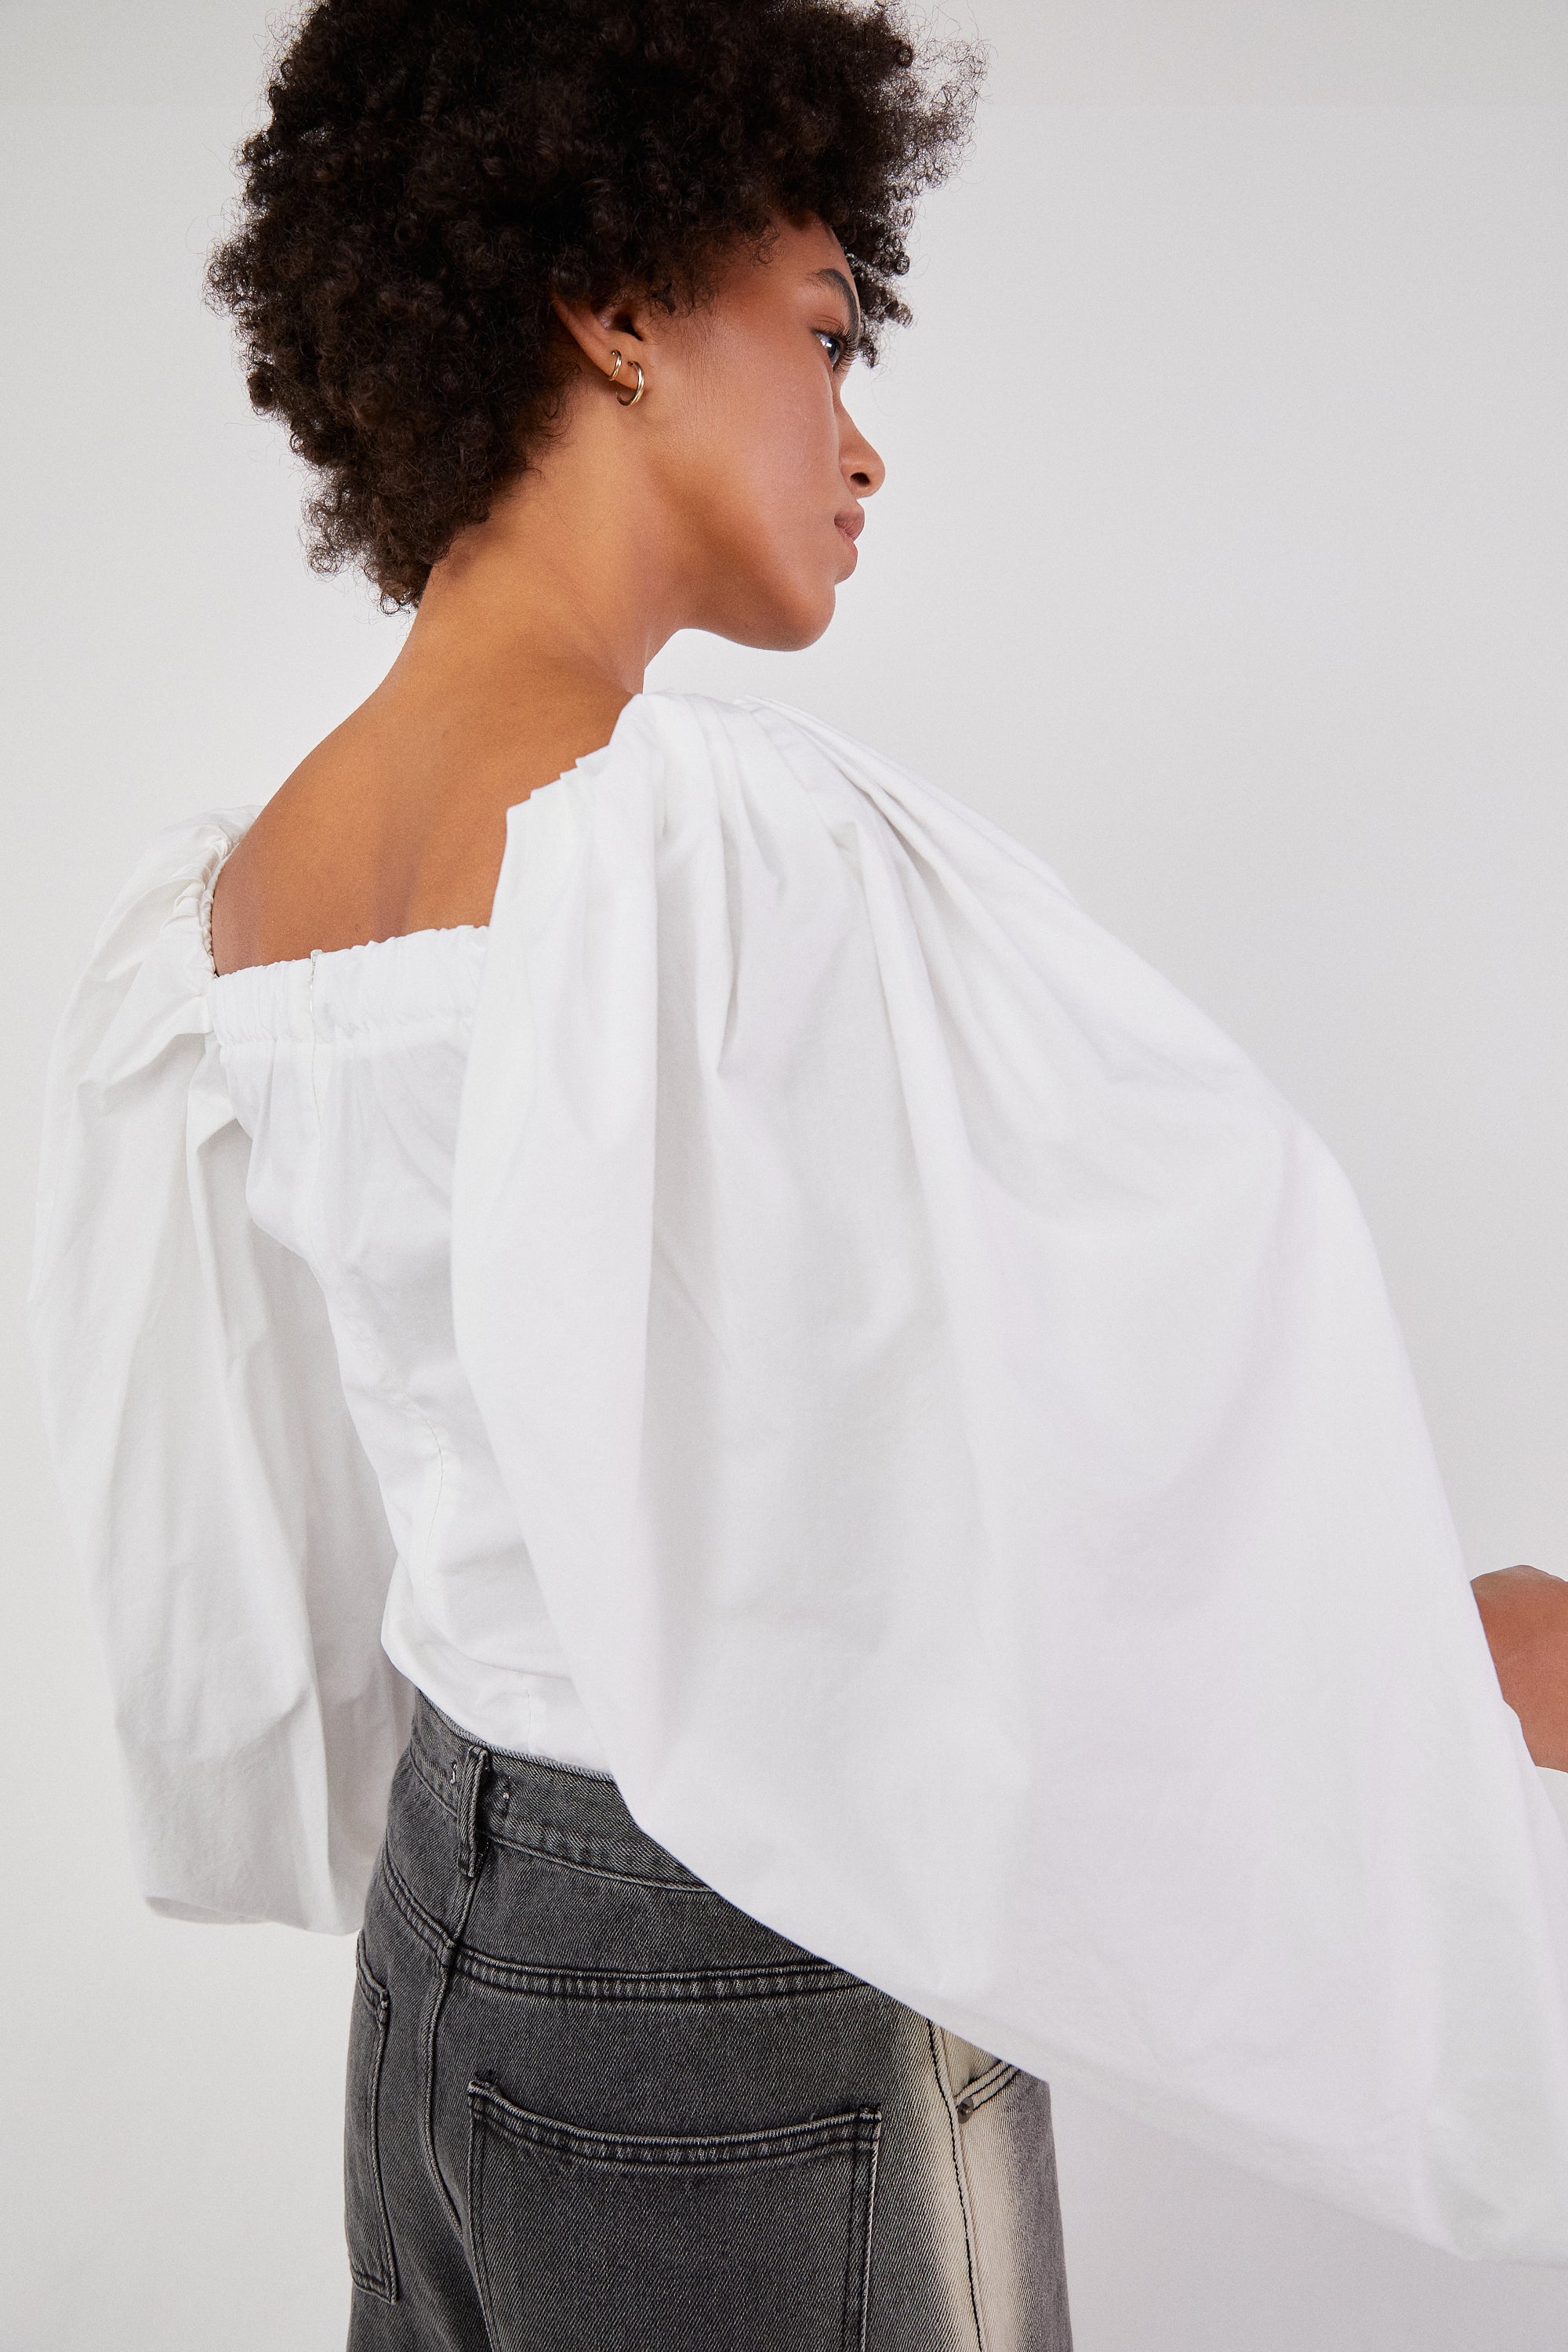 Balloon Sleeve Puffed Off-Shoulder Top, White – SourceUnknown